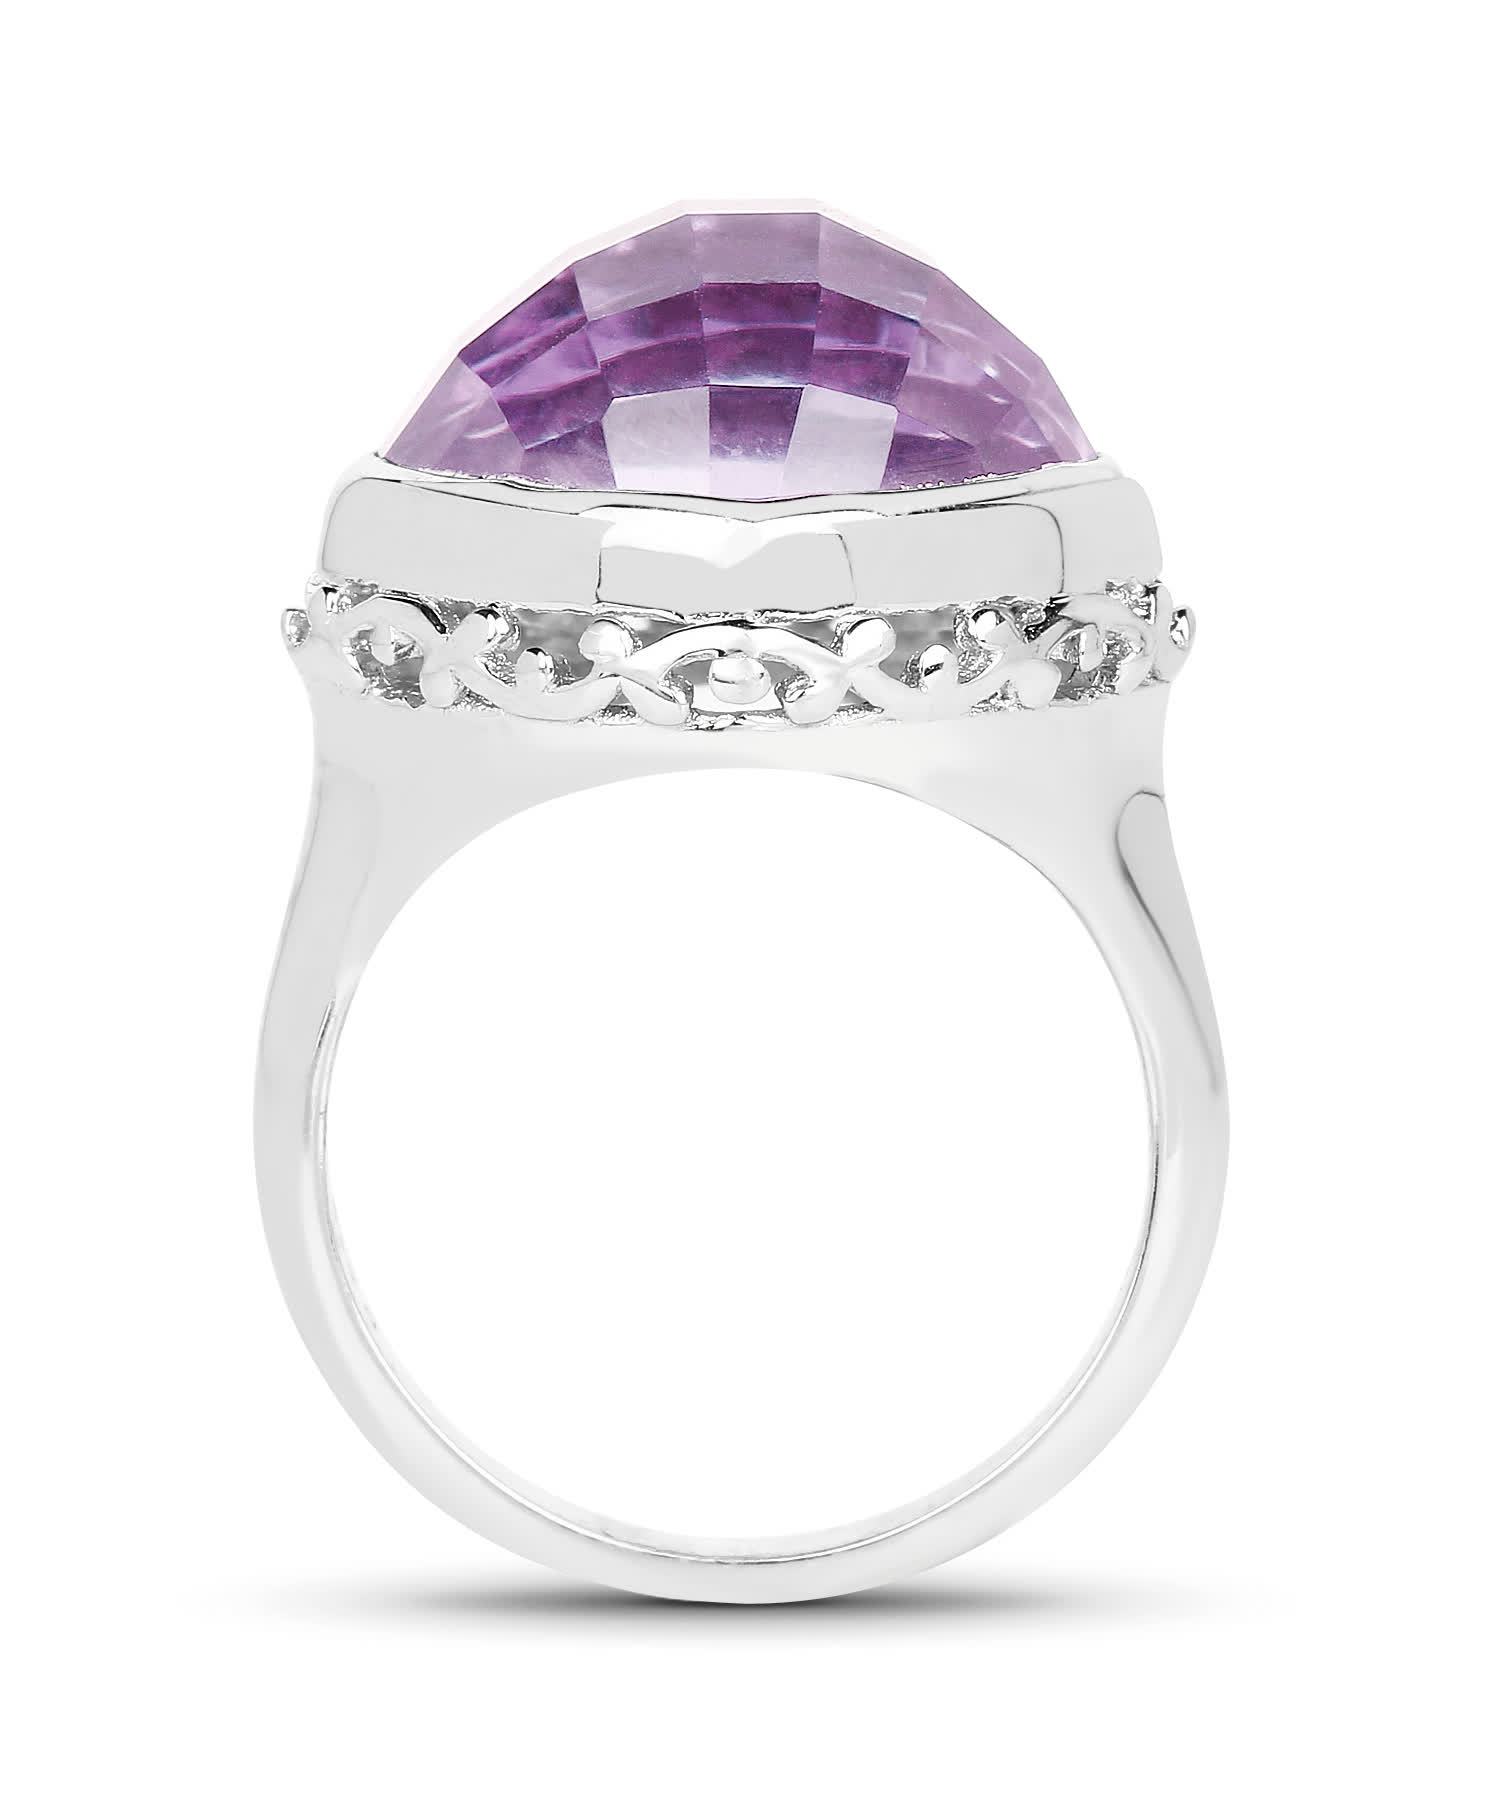 8.40ctw Natural Amethyst Rhodium Plated 925 Sterling Silver Cocktail Ring View 2